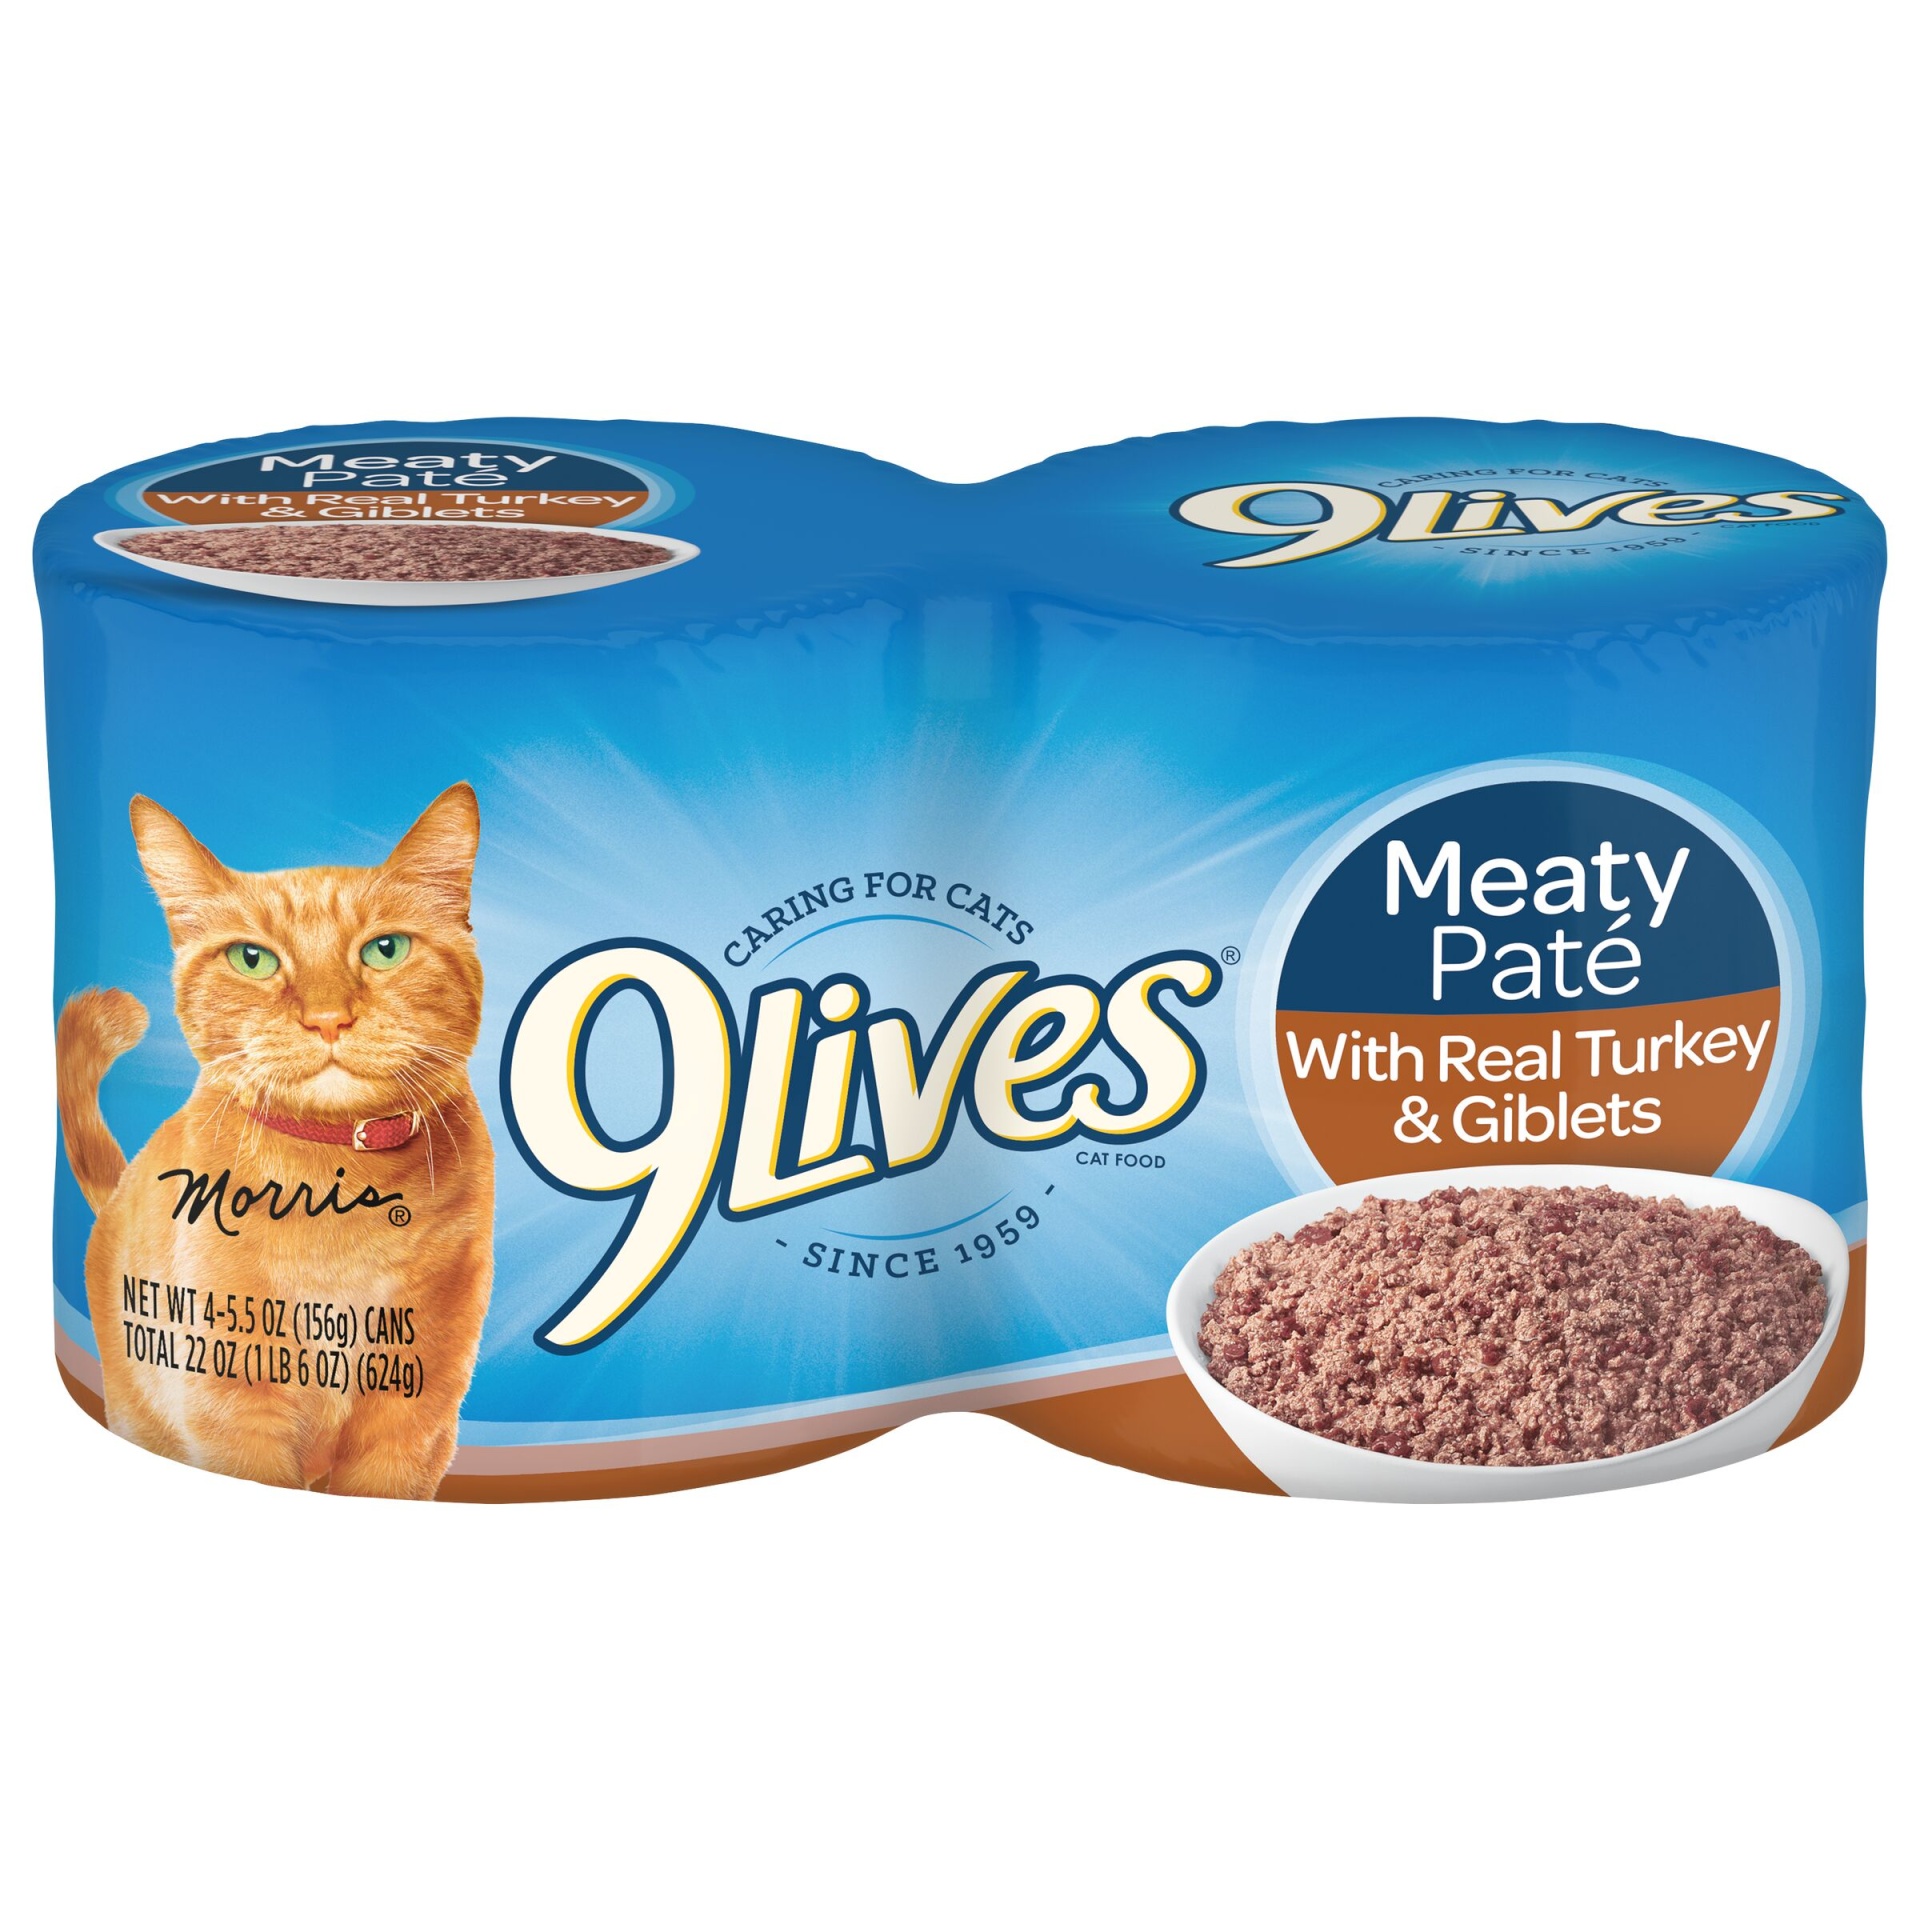 slide 1 of 2, 9Lives Cat Food, Meaty Paté with Real Turkey & Giblets, 4 ct; 5.5 oz